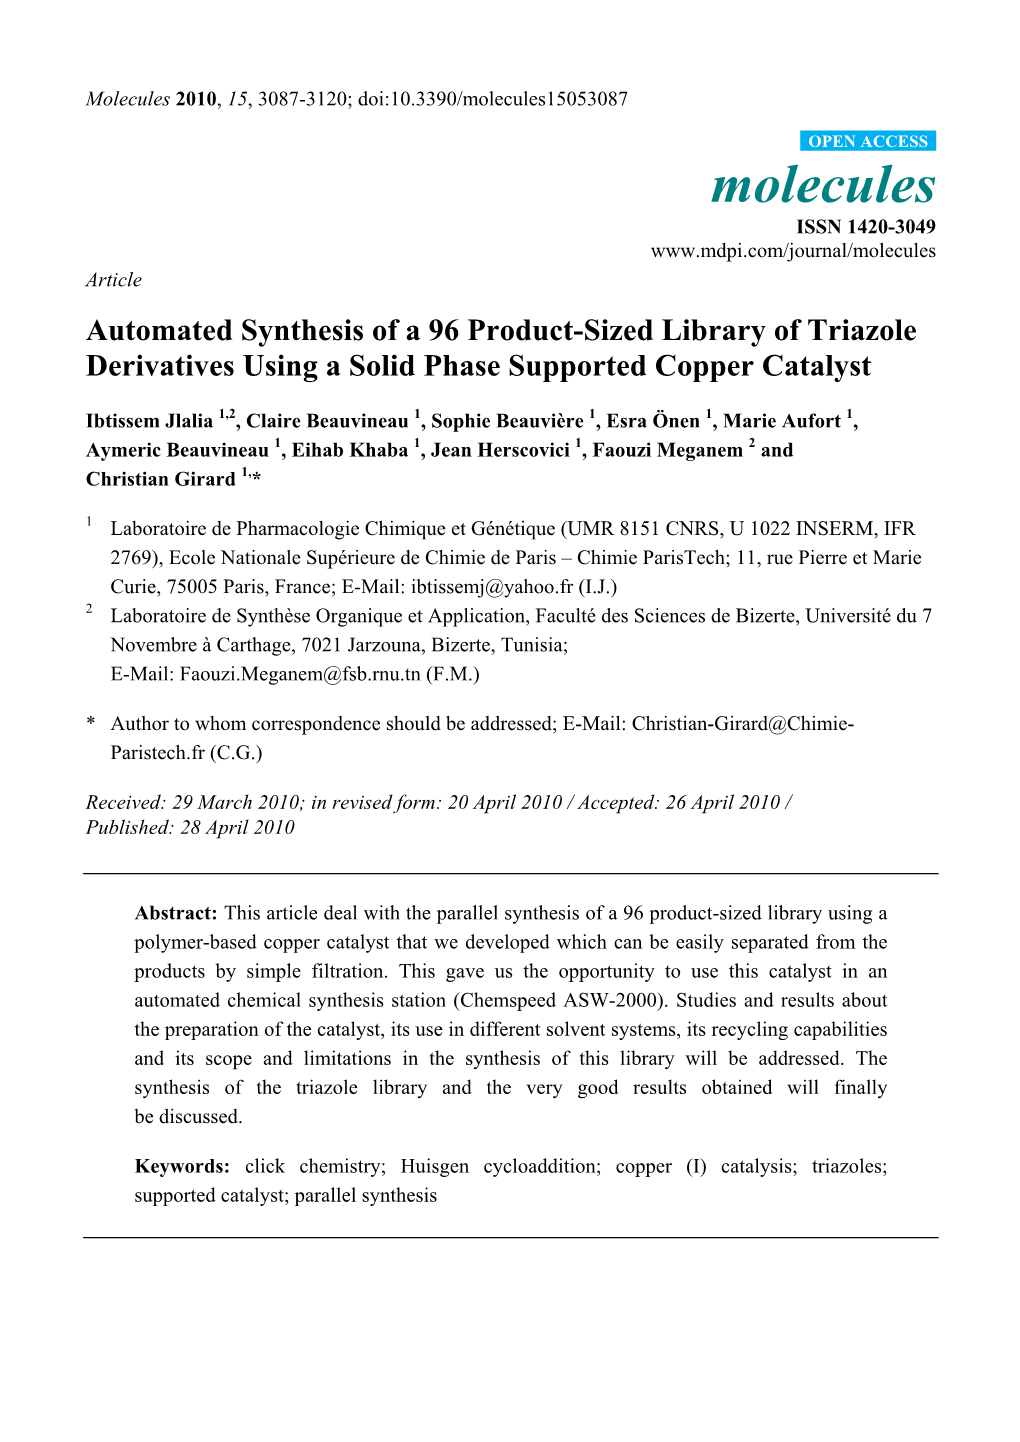 Automated Synthesis of a 96 Product-Sized Library of Triazole Derivatives Using a Solid Phase Supported Copper Catalyst